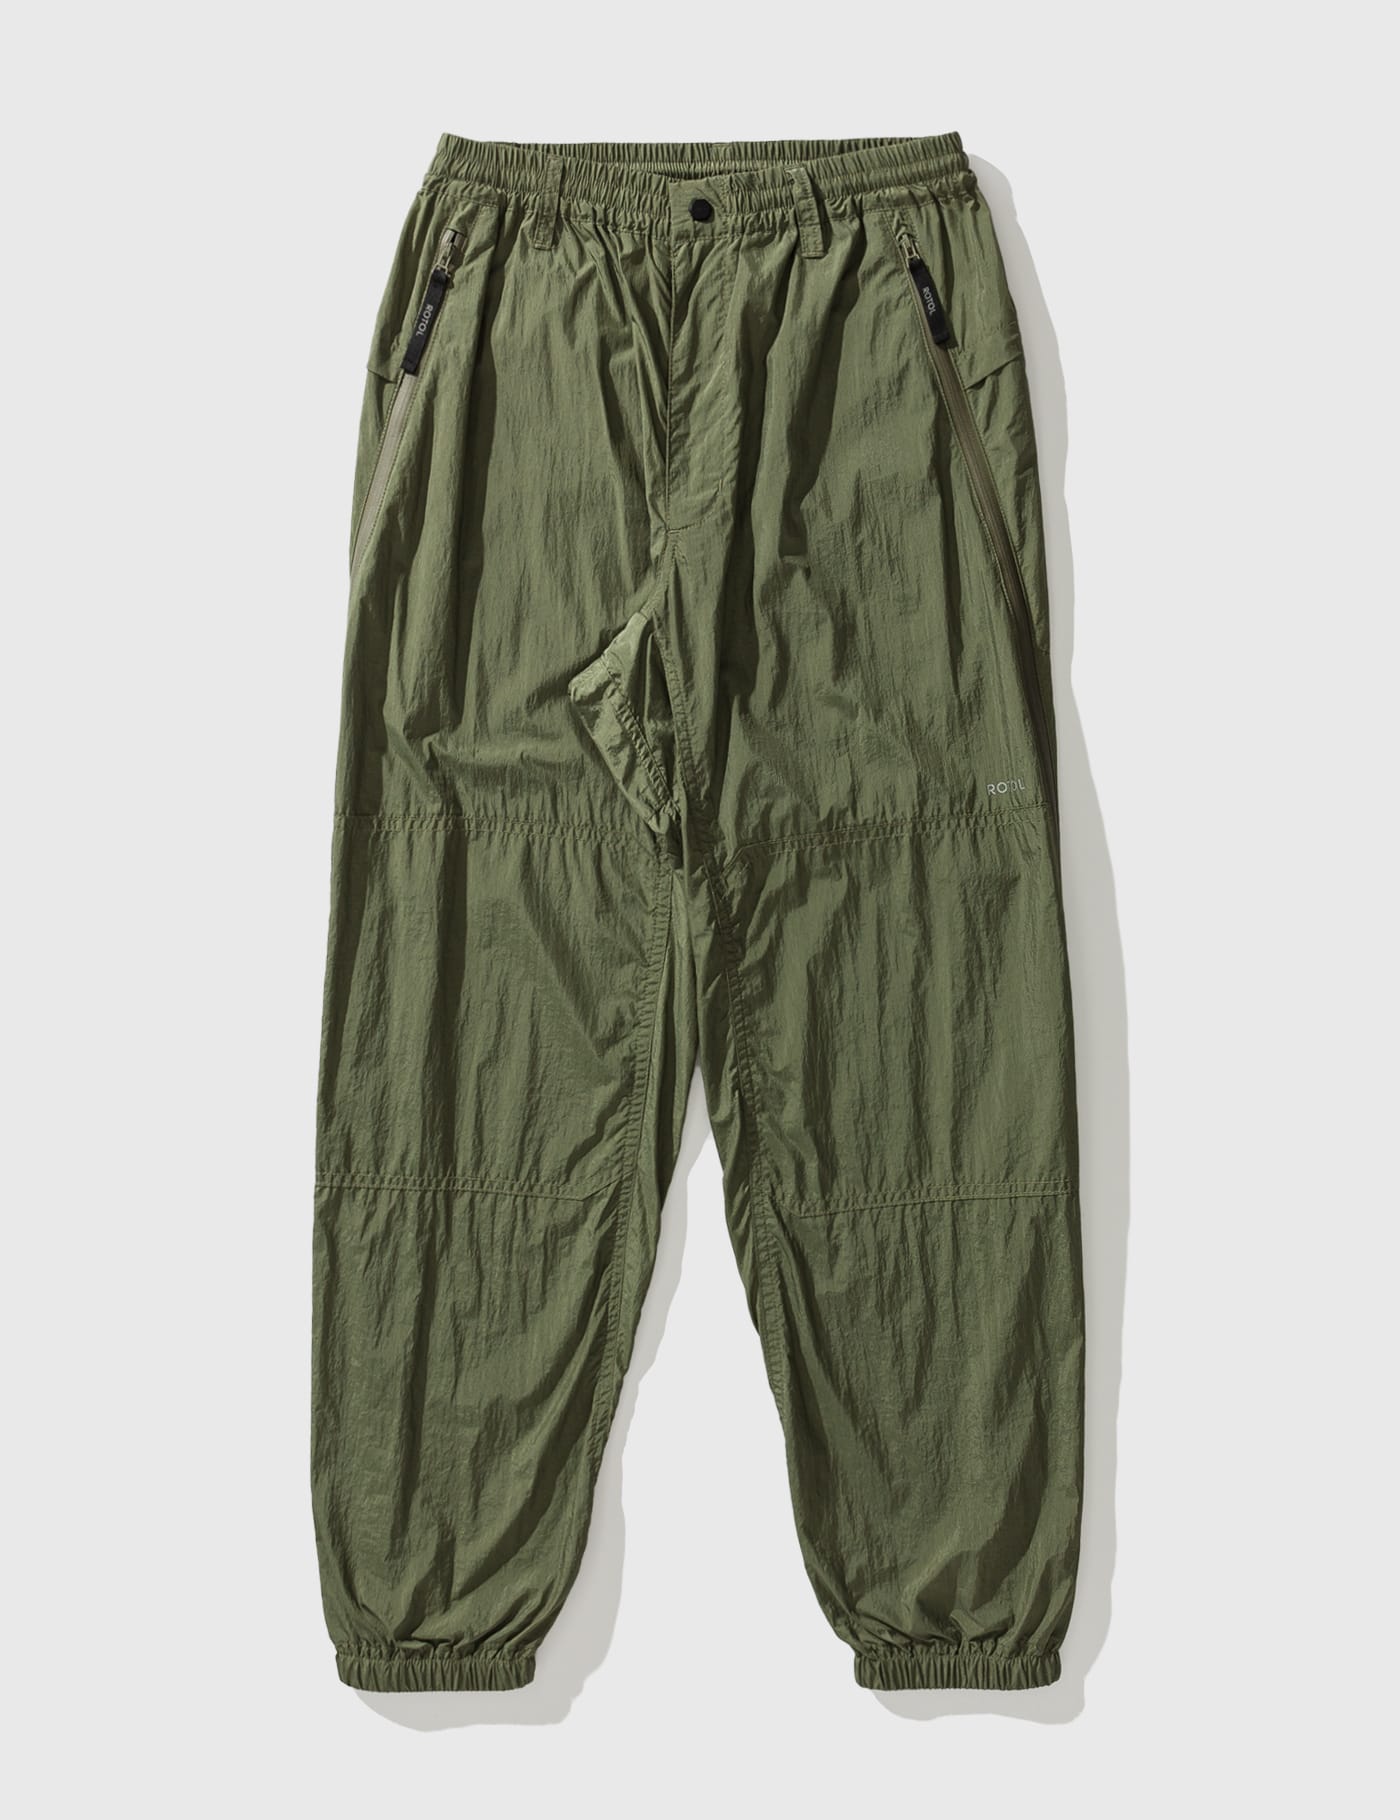 Rotol - Twist Track Pants | HBX - Globally Curated Fashion and